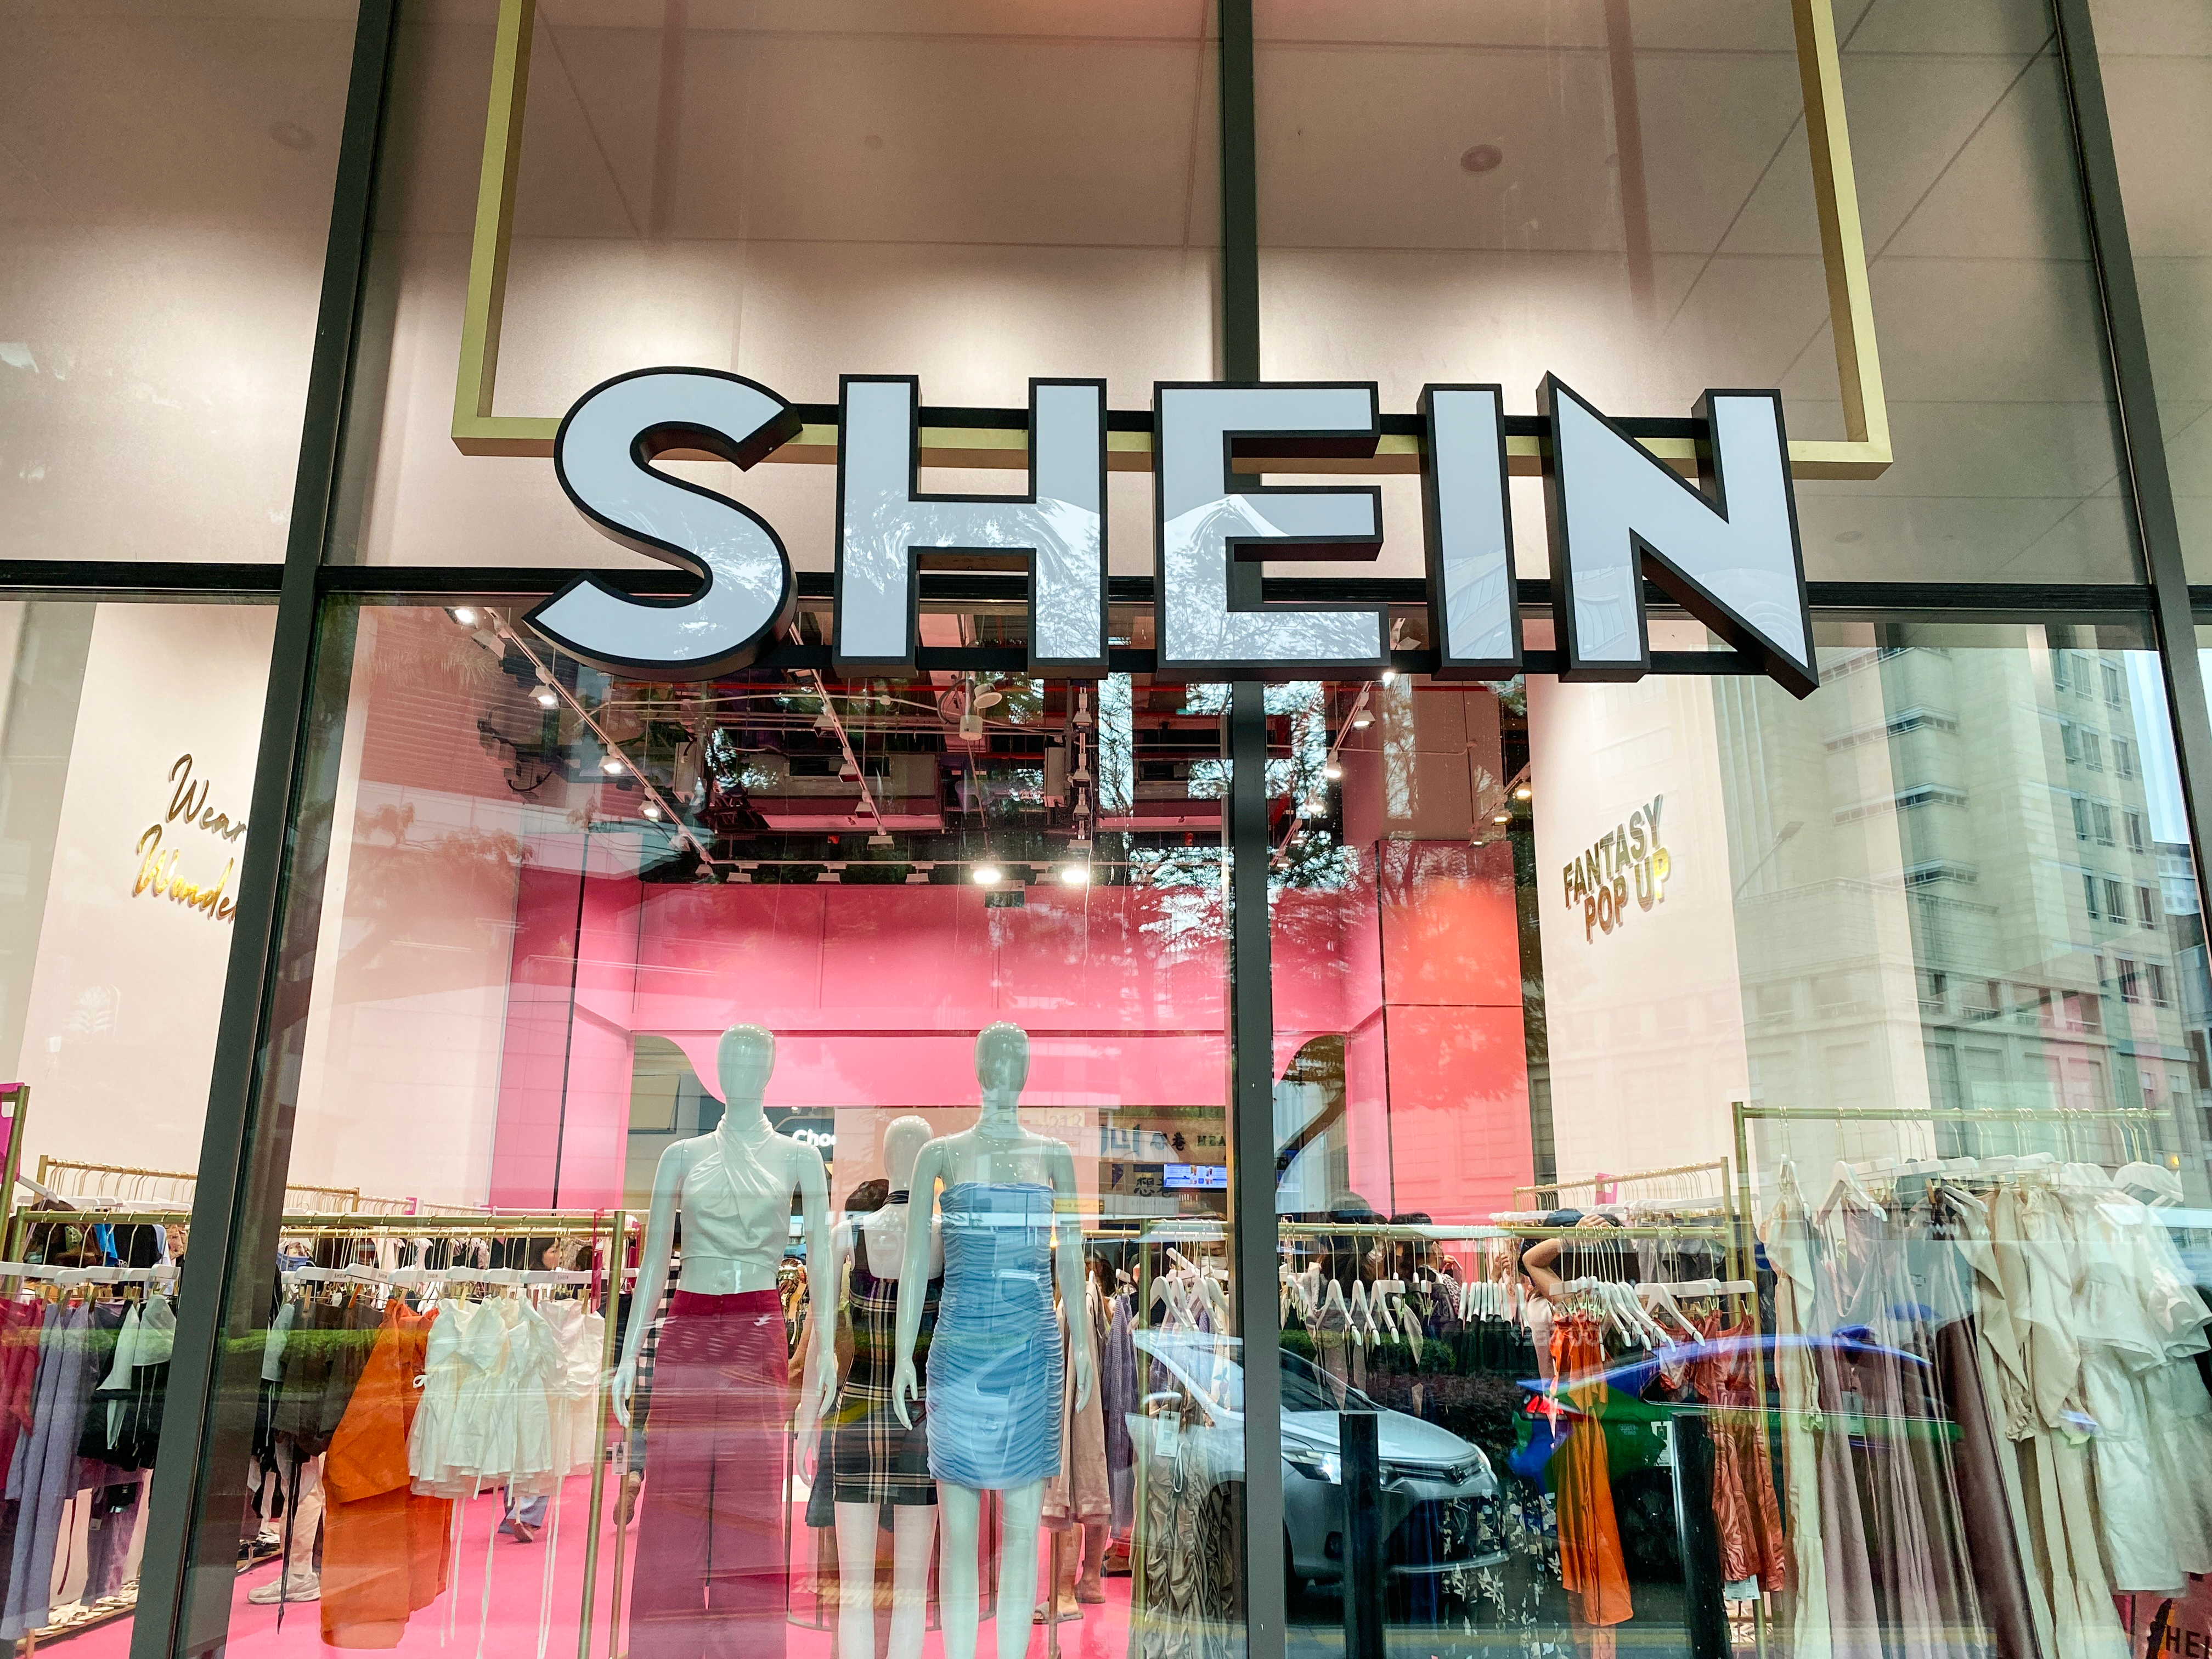 Shein to add 'supply chain-as-a-service' offering